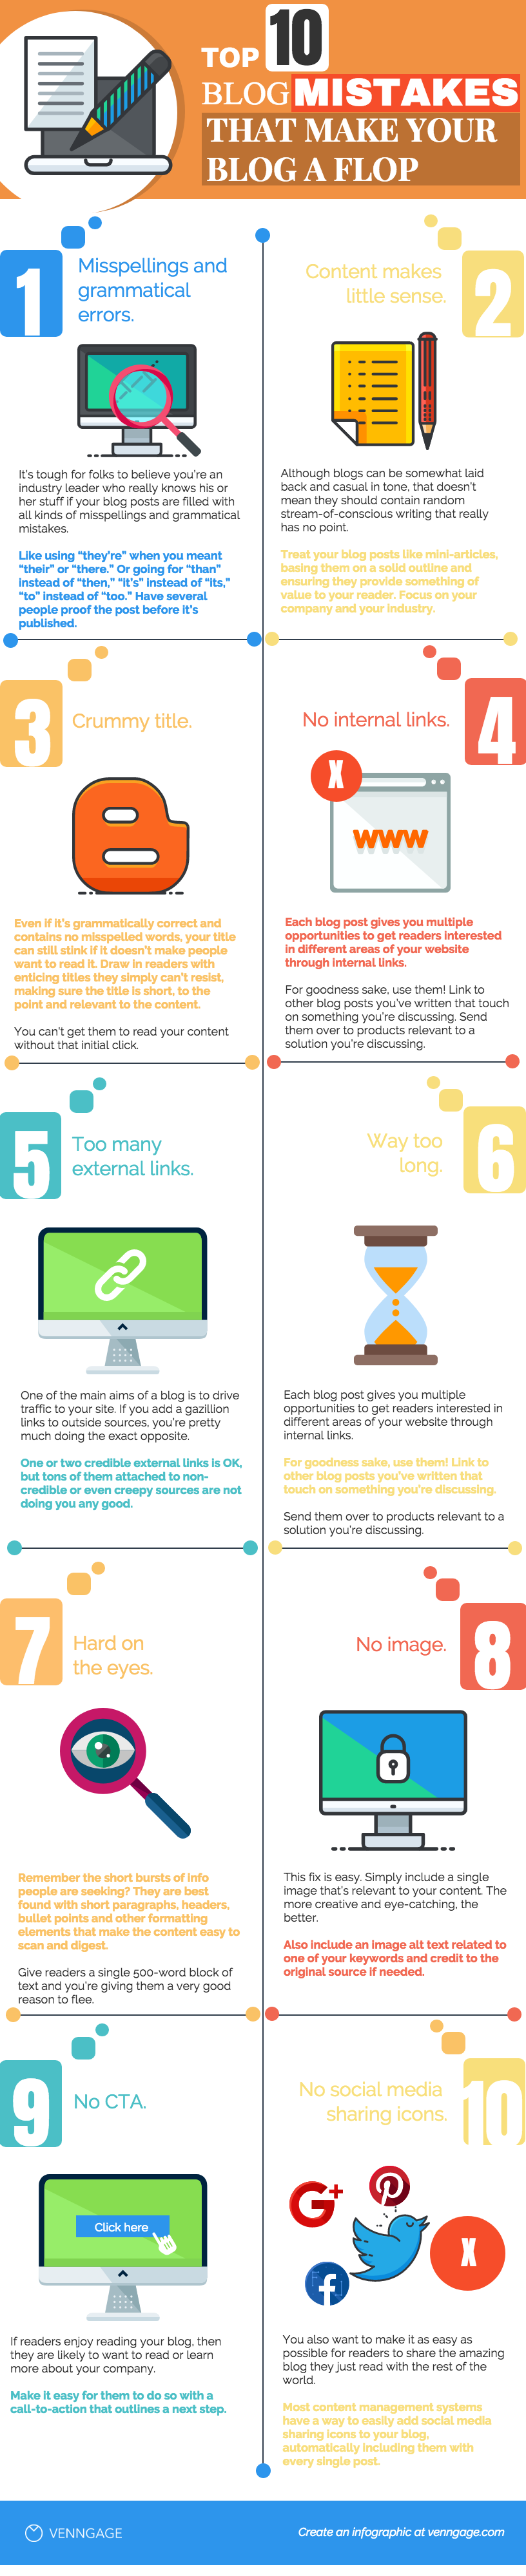 Top-10-blog-mistakes-that-make-your-blog-a-flop-Venngage-Infographic.png